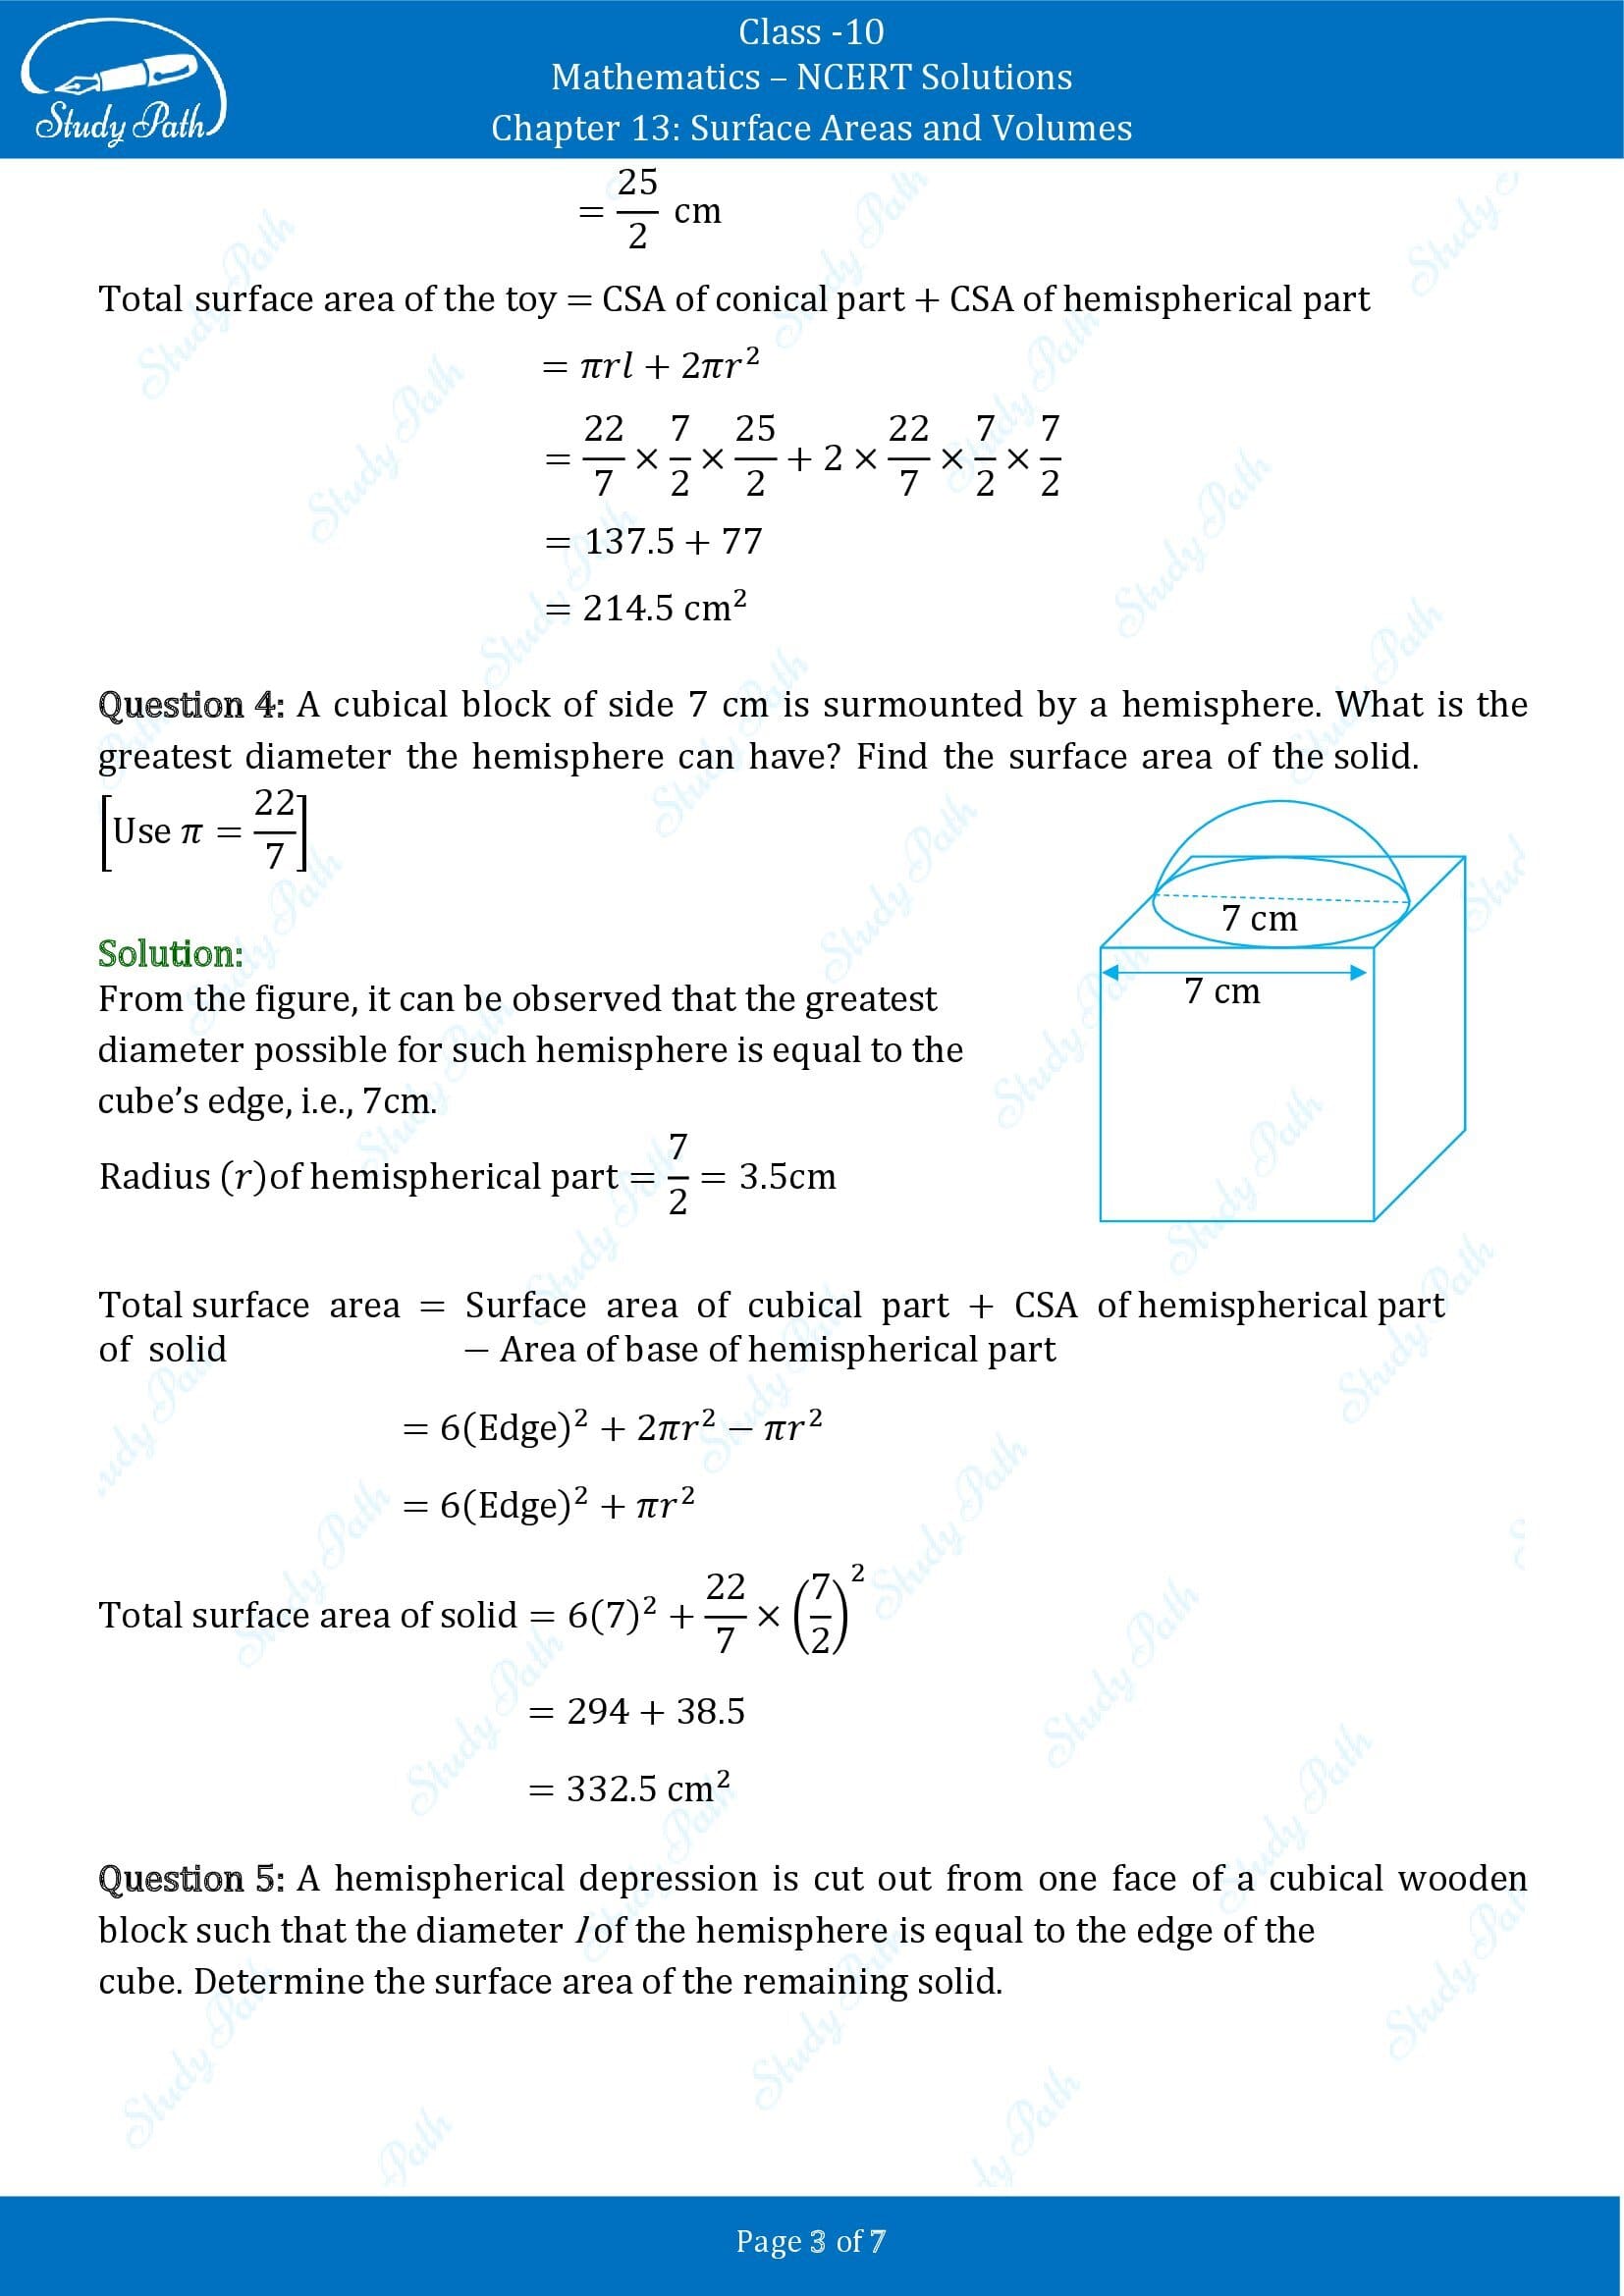 NCERT Solutions for Class 10 Maths Chapter 13 Surface Areas and Volumes Exercise 13.1 00003